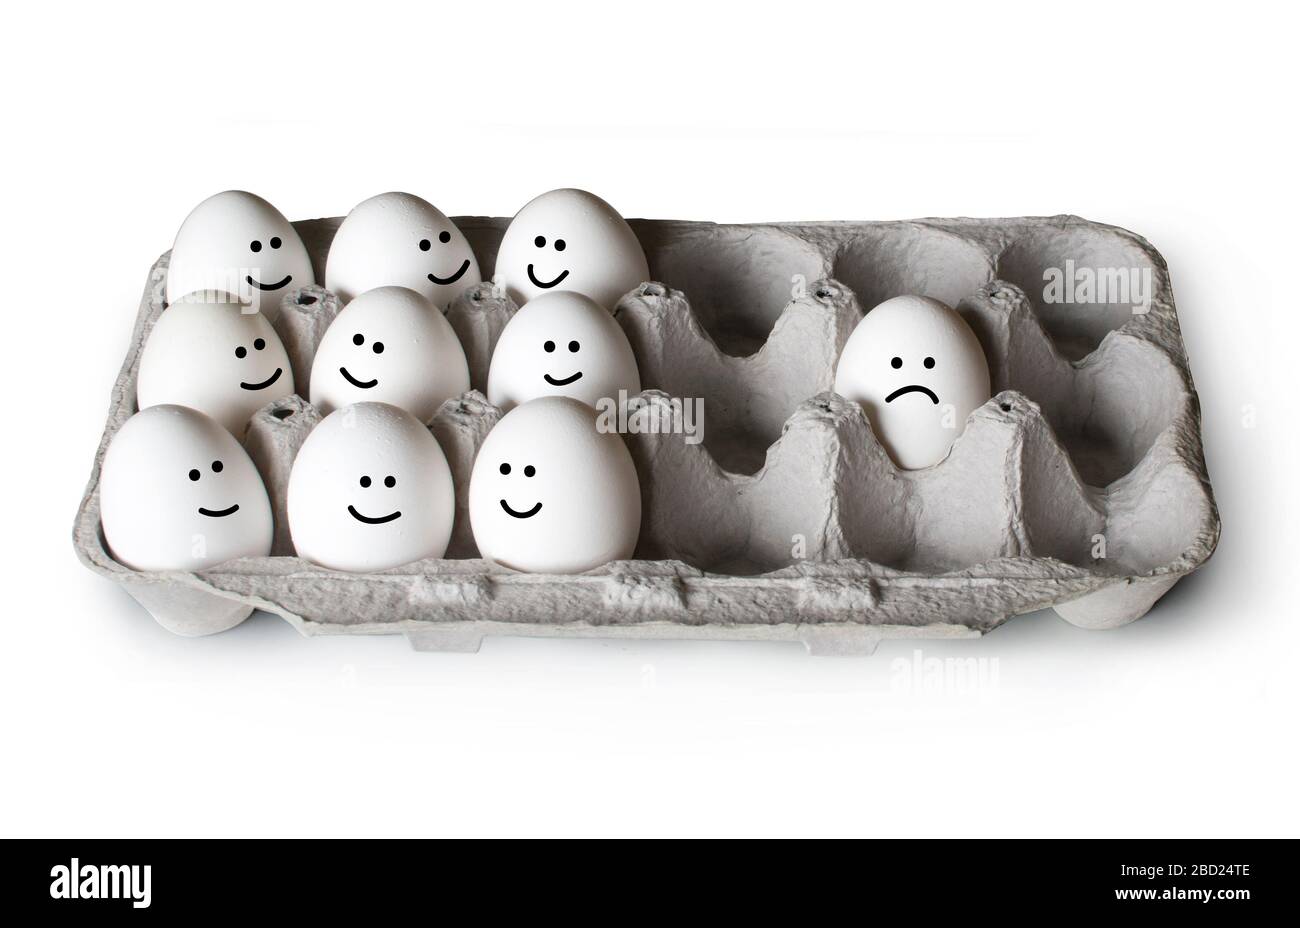 White eggs in a carton, one separated from the crowd, social distancing concept Stock Photo